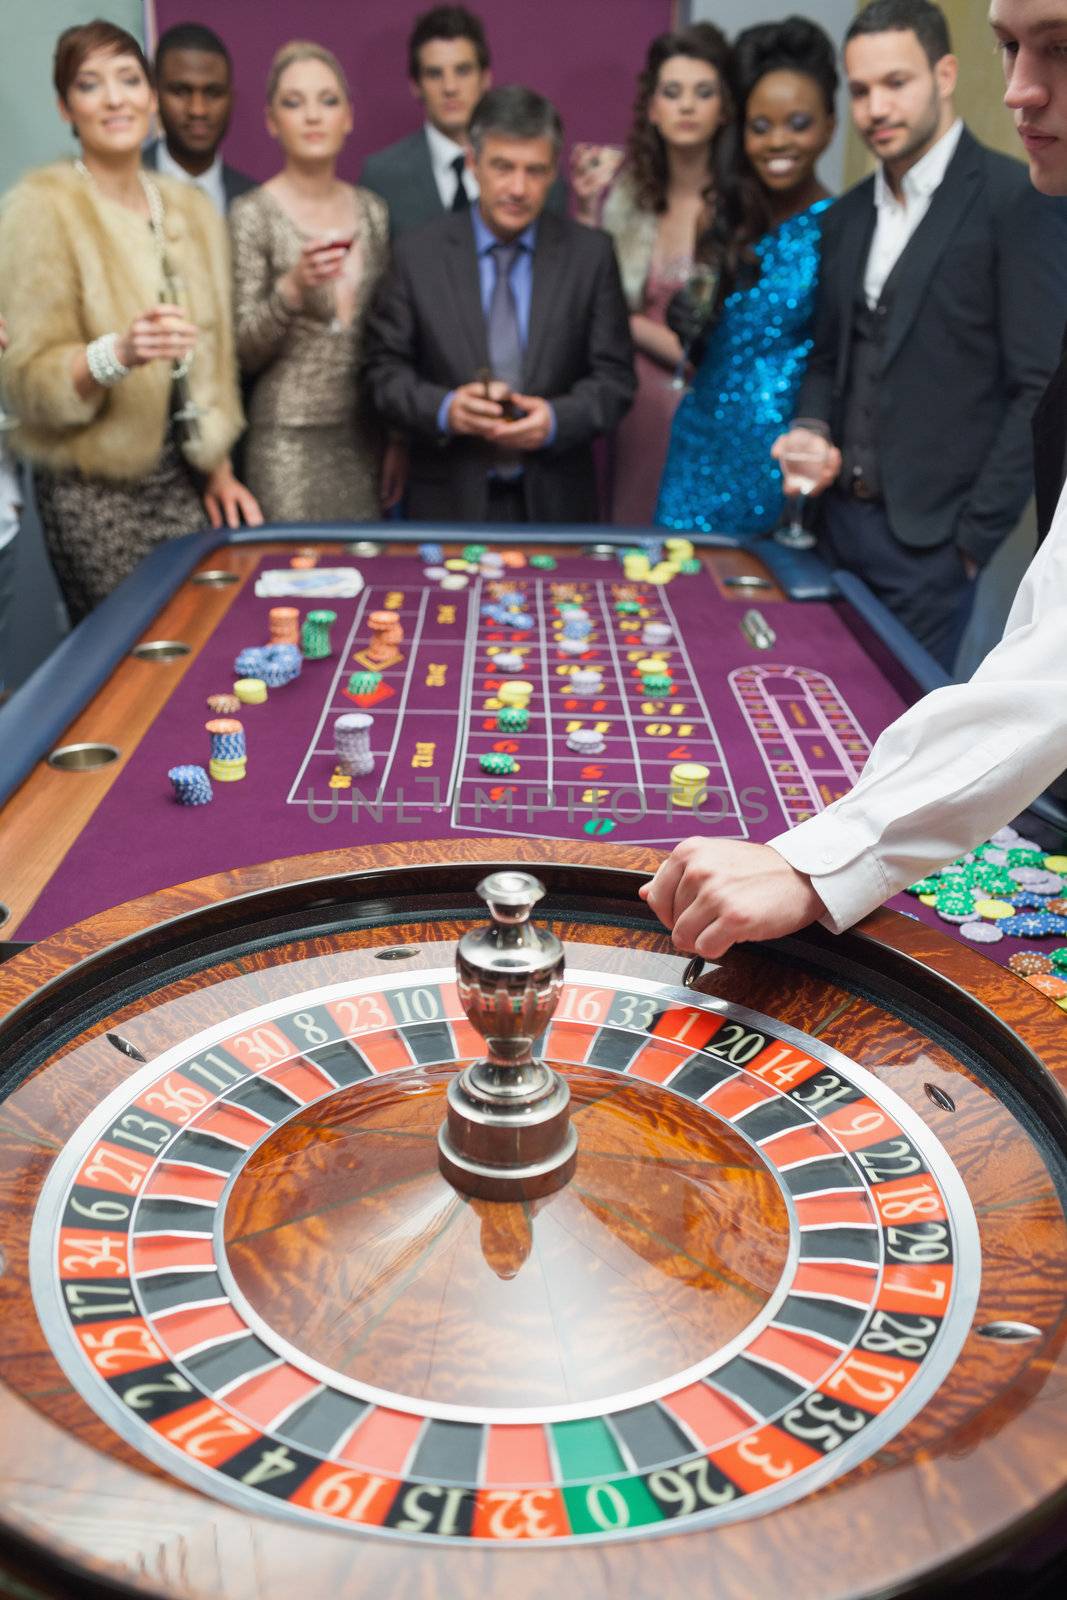 People standing at the roulette table in casino